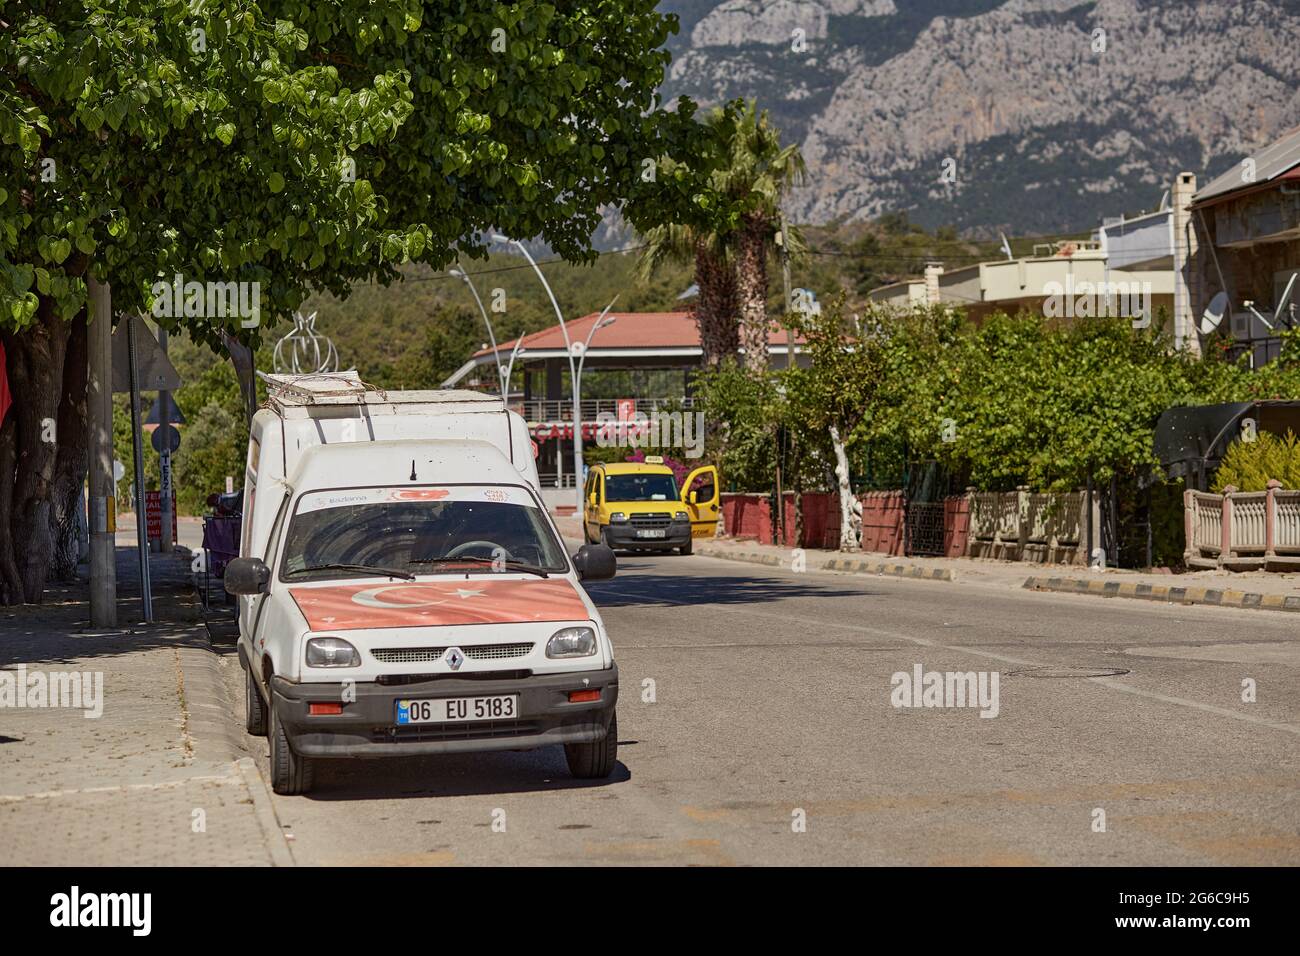 Alanya, Turkey - May 24, 2021: White auto with turkish flag. Yellow taxi on the road on bright sunny day and mountains view. Travel Turkey concept Stock Photo